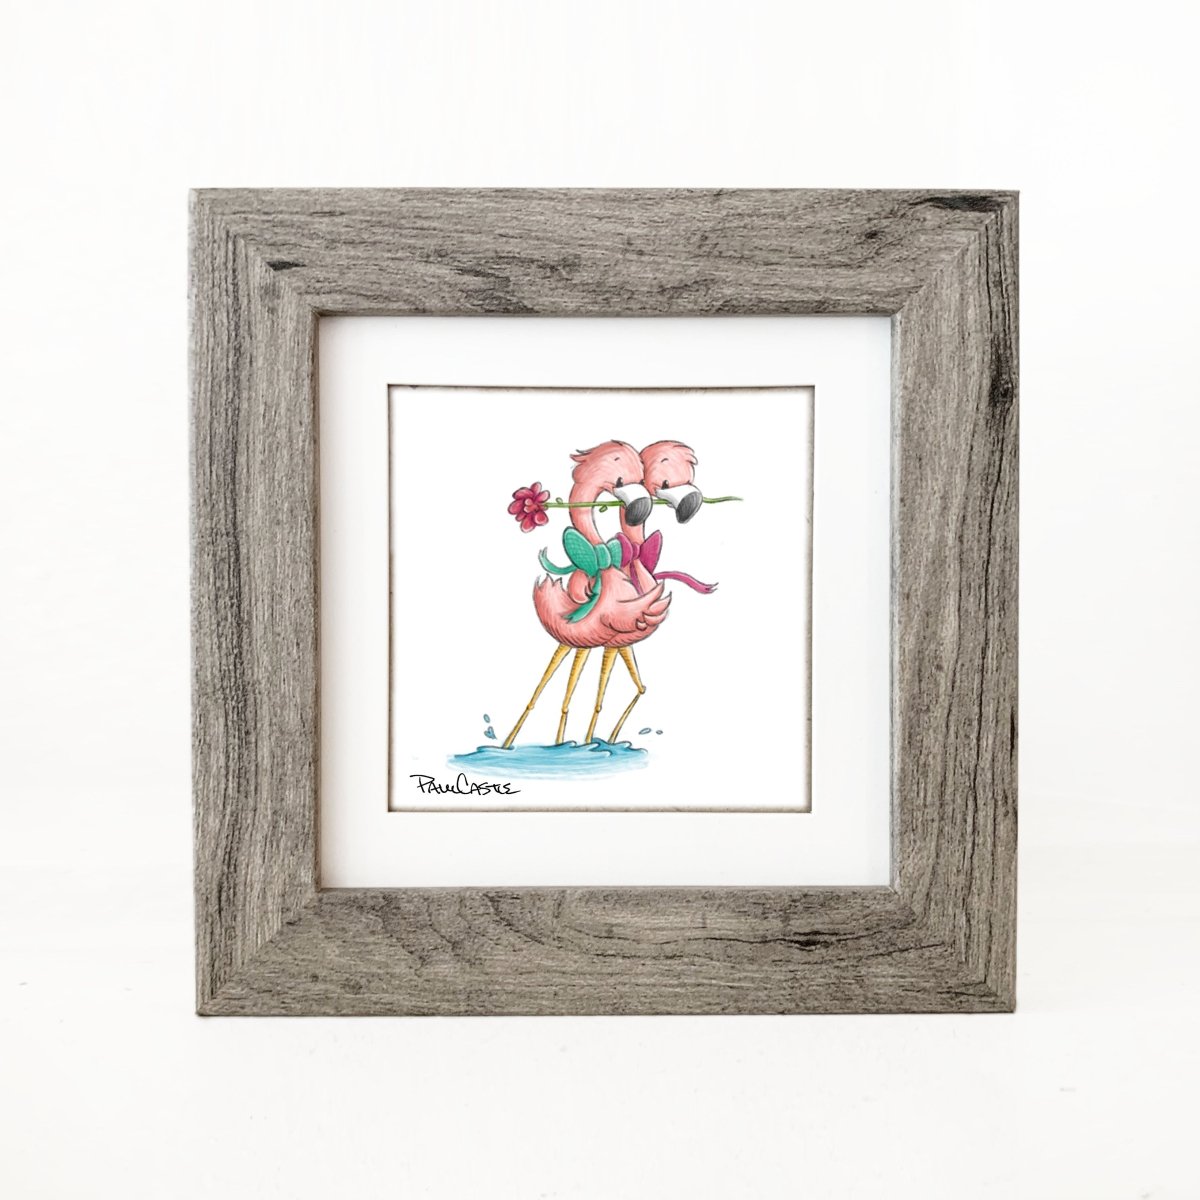 flamingos-dancing-with-rose-in-mouth-illustration-grey-frame